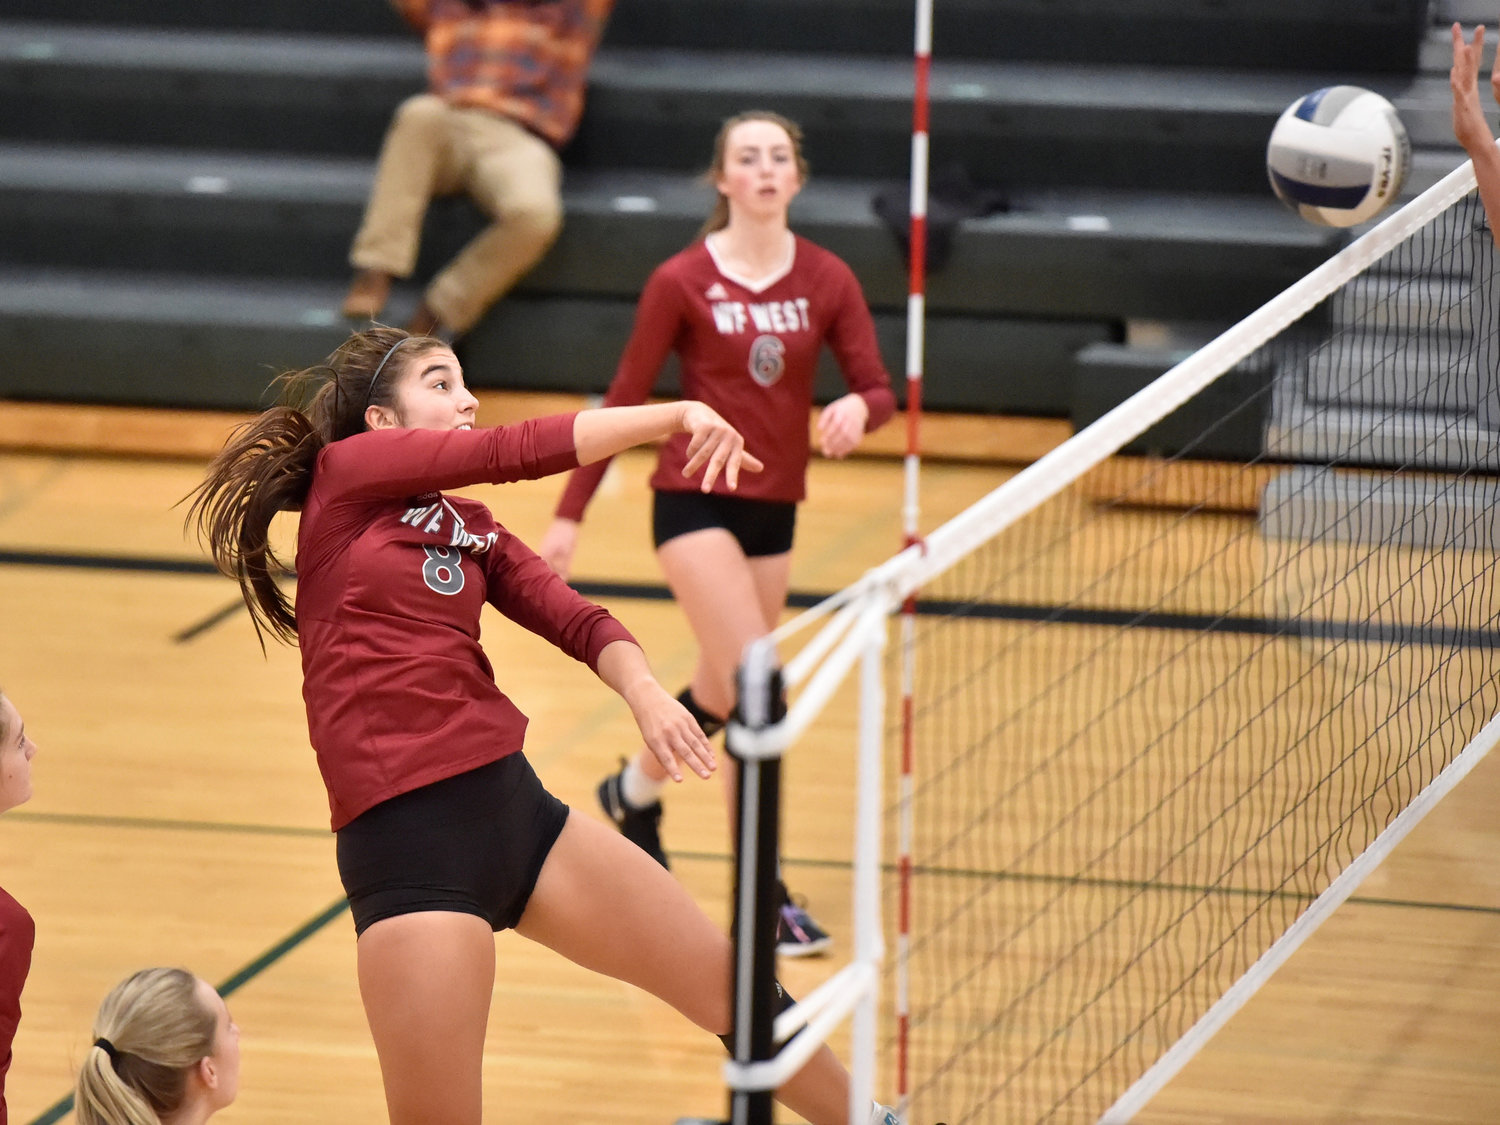 W.F. West senior Anna White adjusts for an attack against Woodland on Nov. 9.